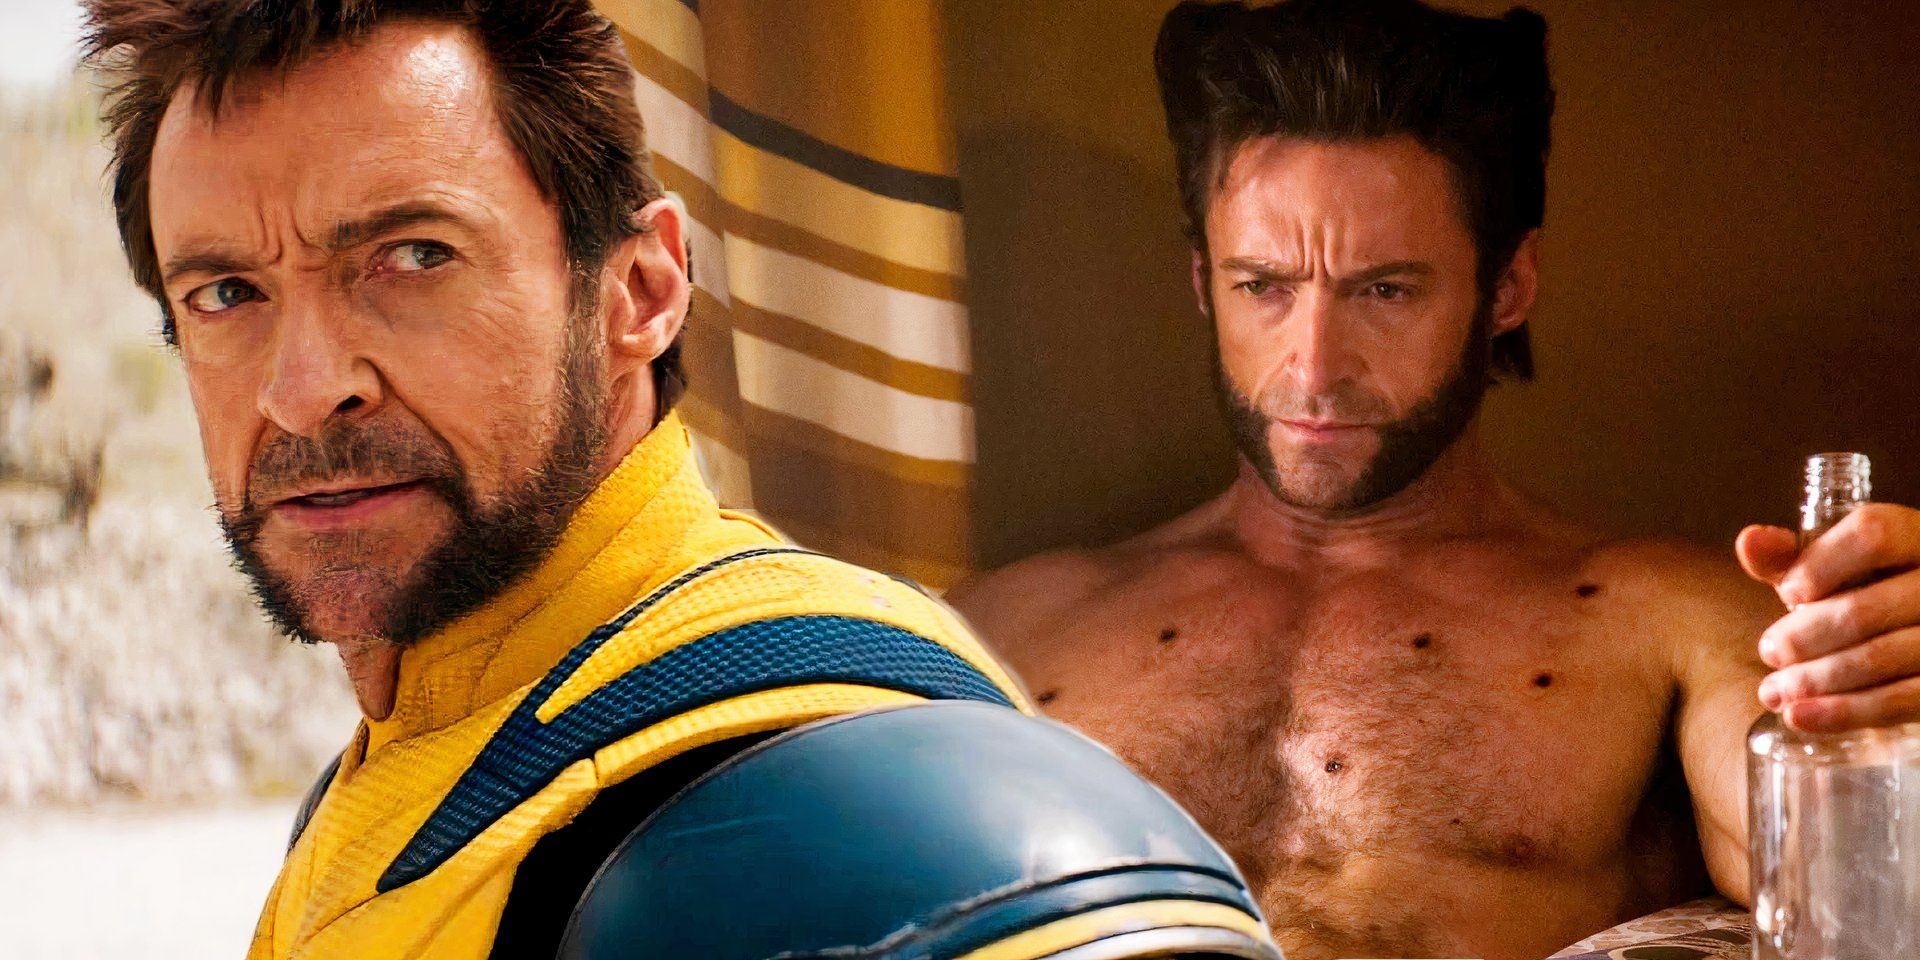 Hugh Jackman as Wolverine looking back at Deadpool and holding a bottle in X-Men: Days of Future Past